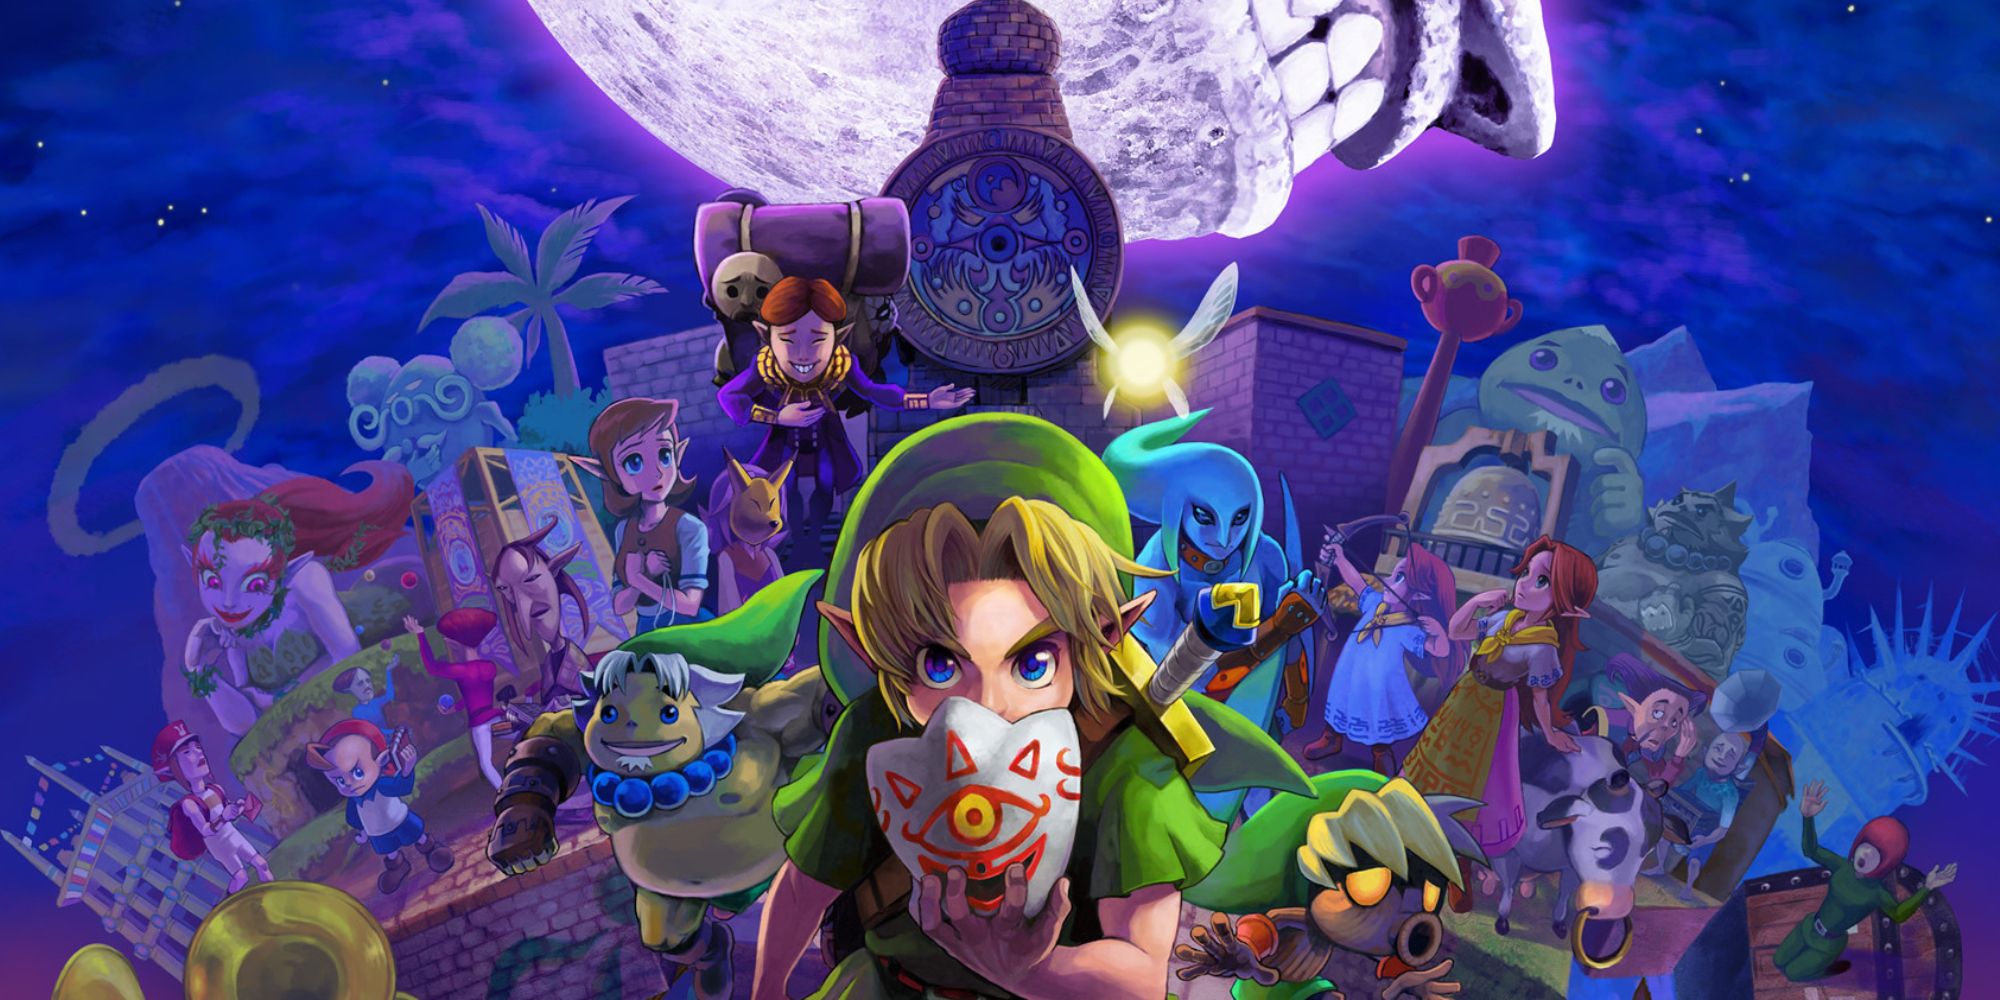 Majora's Mask official art showing Link holding the Mask of Truth with various characters and the moon in the background.